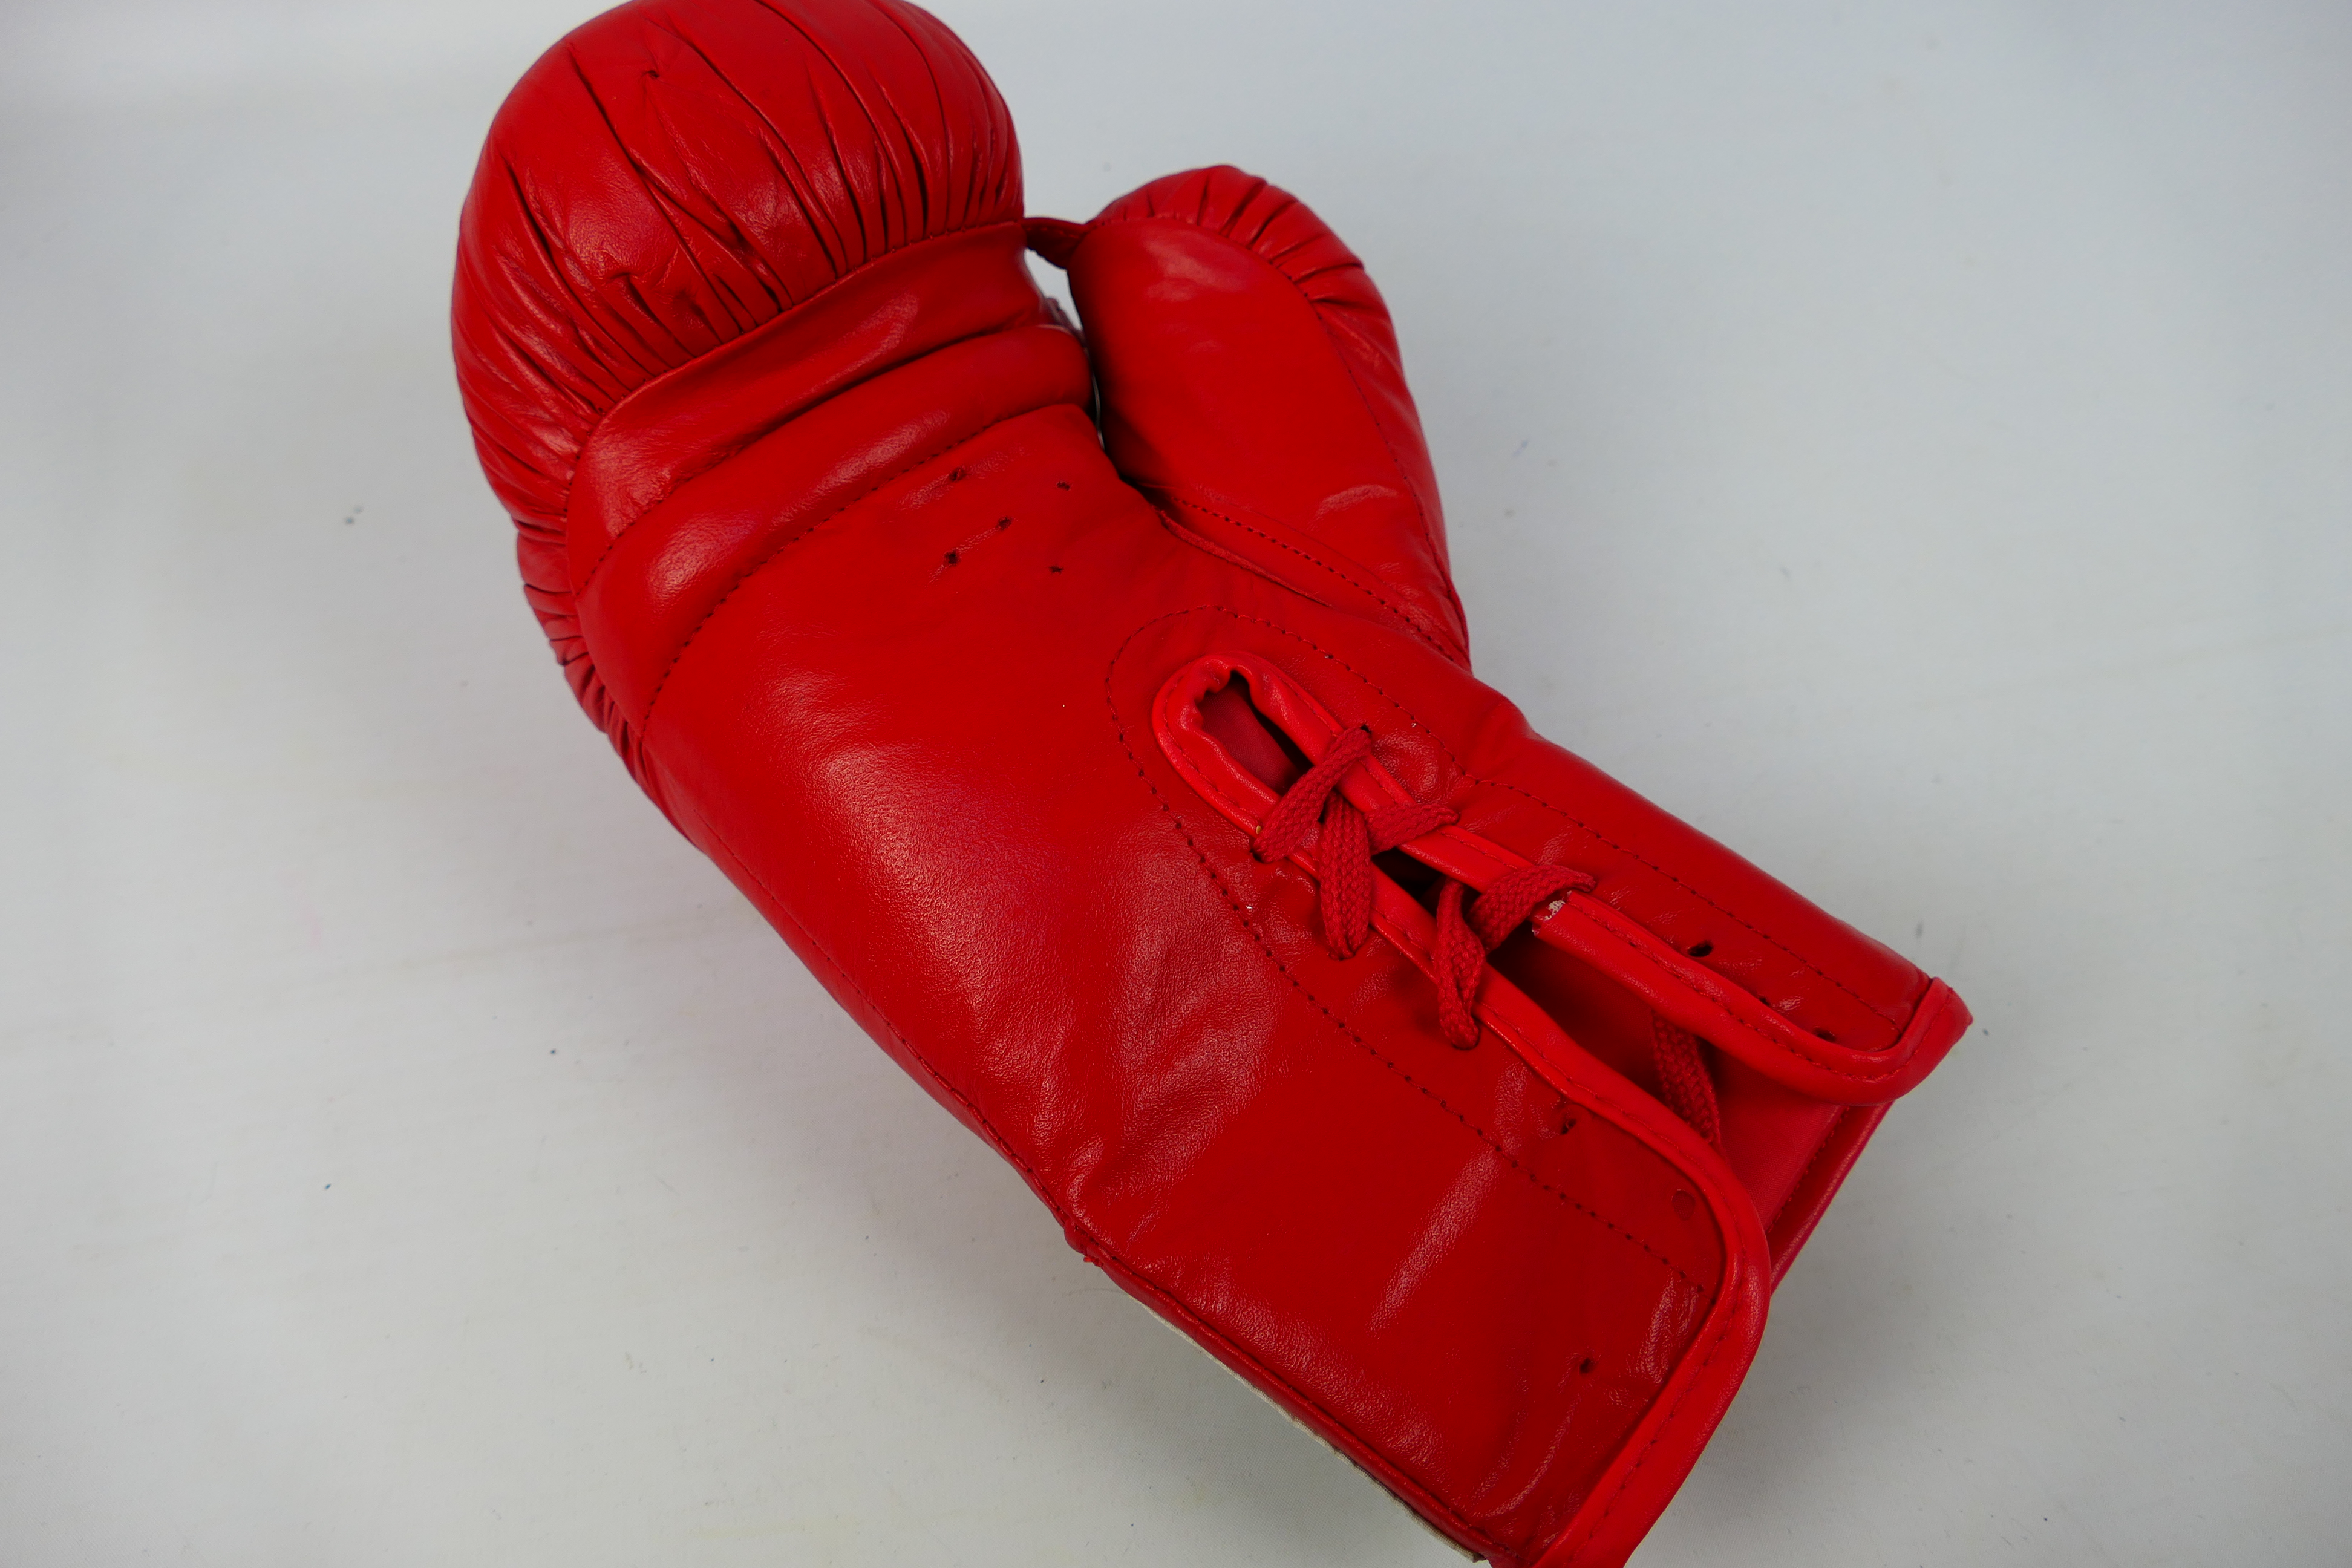 Rocky - A 10oz Everlast boxing glove signed by Dolph Lundgren, inscribed Drago below the signature, - Image 5 of 5